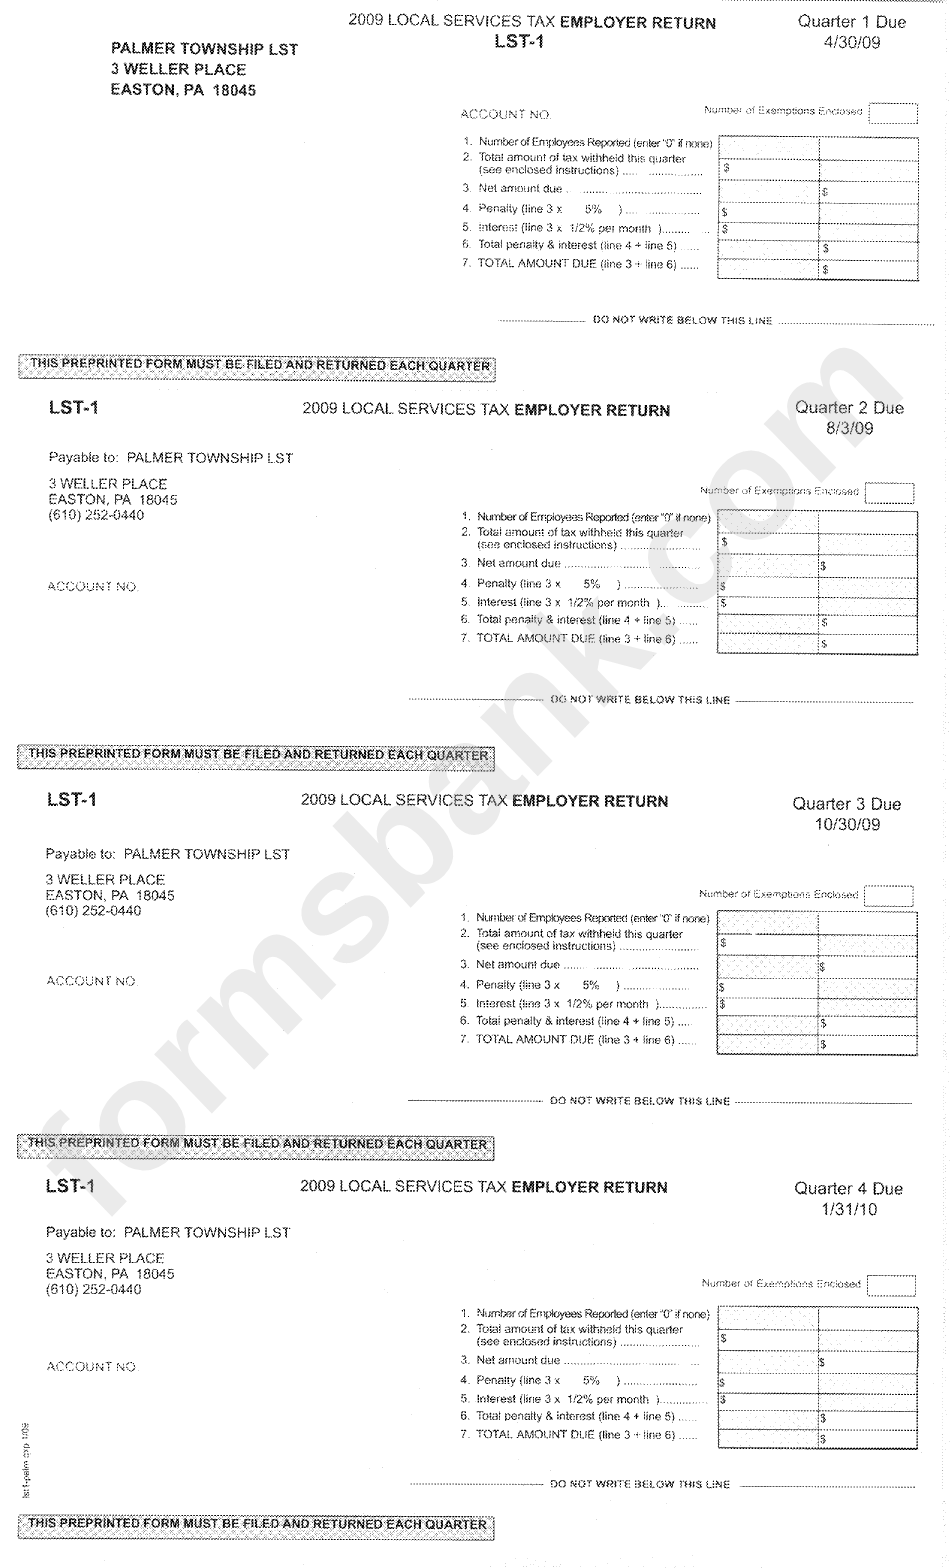 Form Lst-1 - 2009 Local Services Tax Employer Return